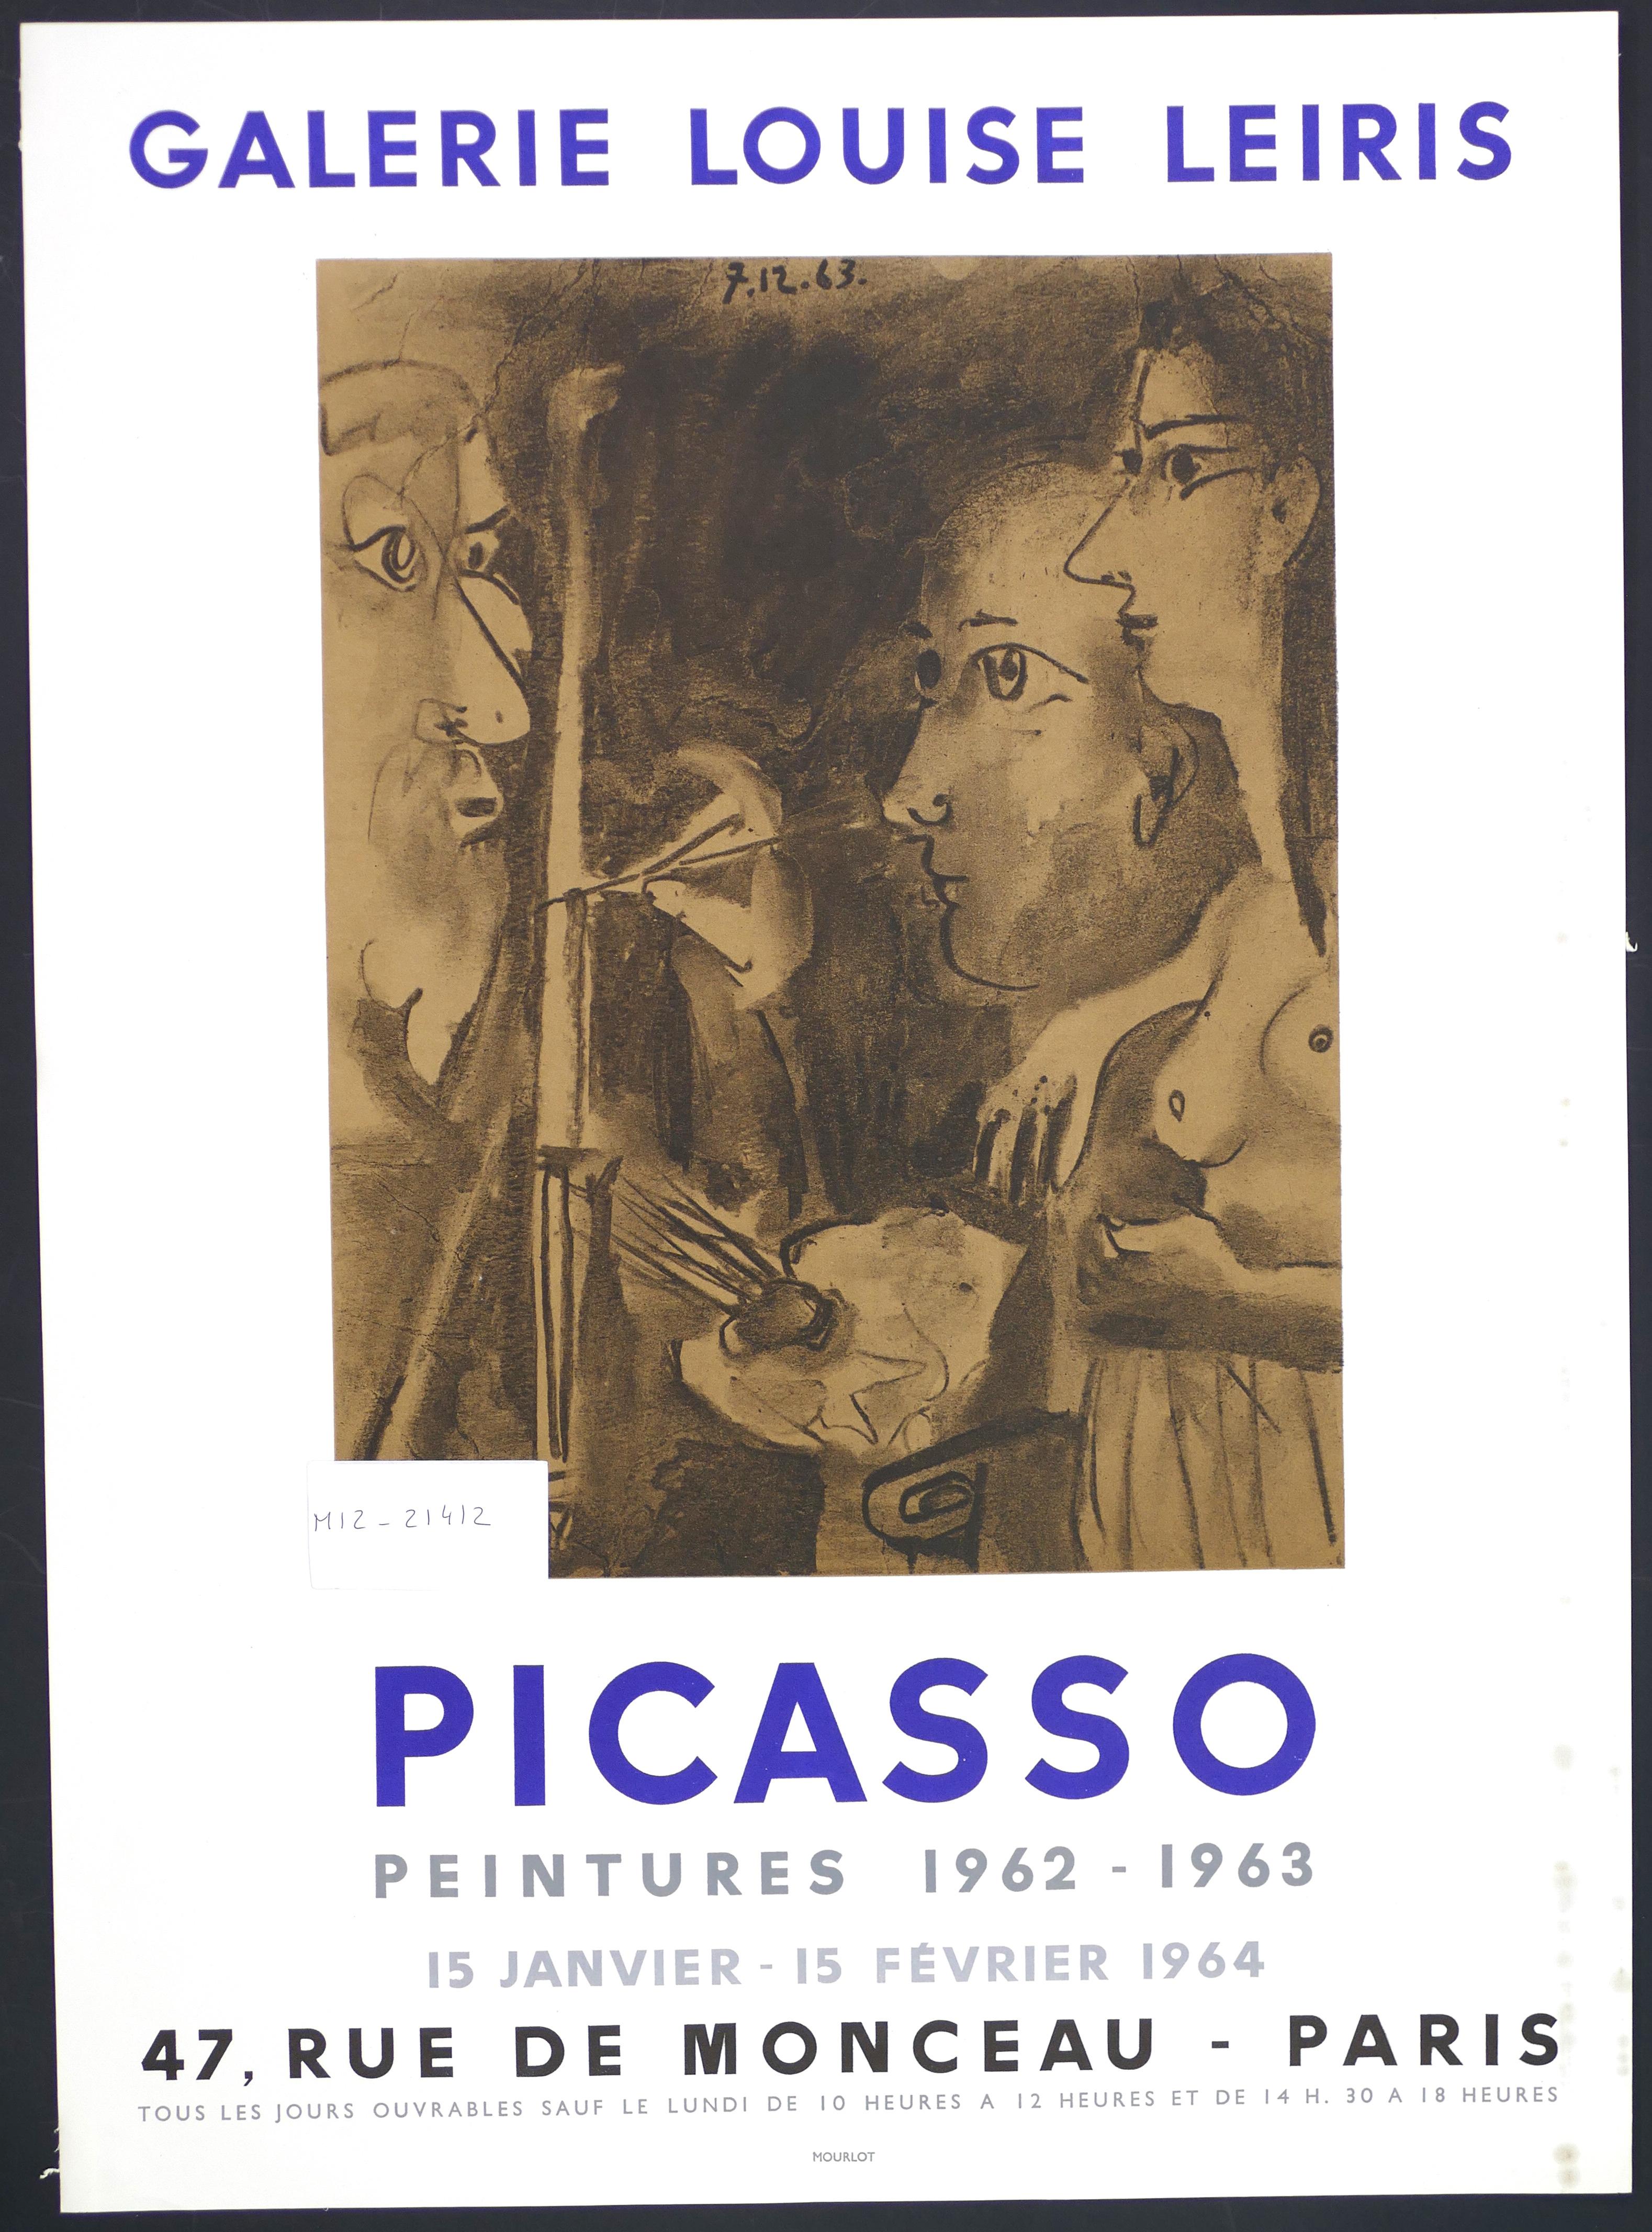 Picasso Vintage Exhibition Poster in Paris - 1964 - Print by (after) Pablo Picasso